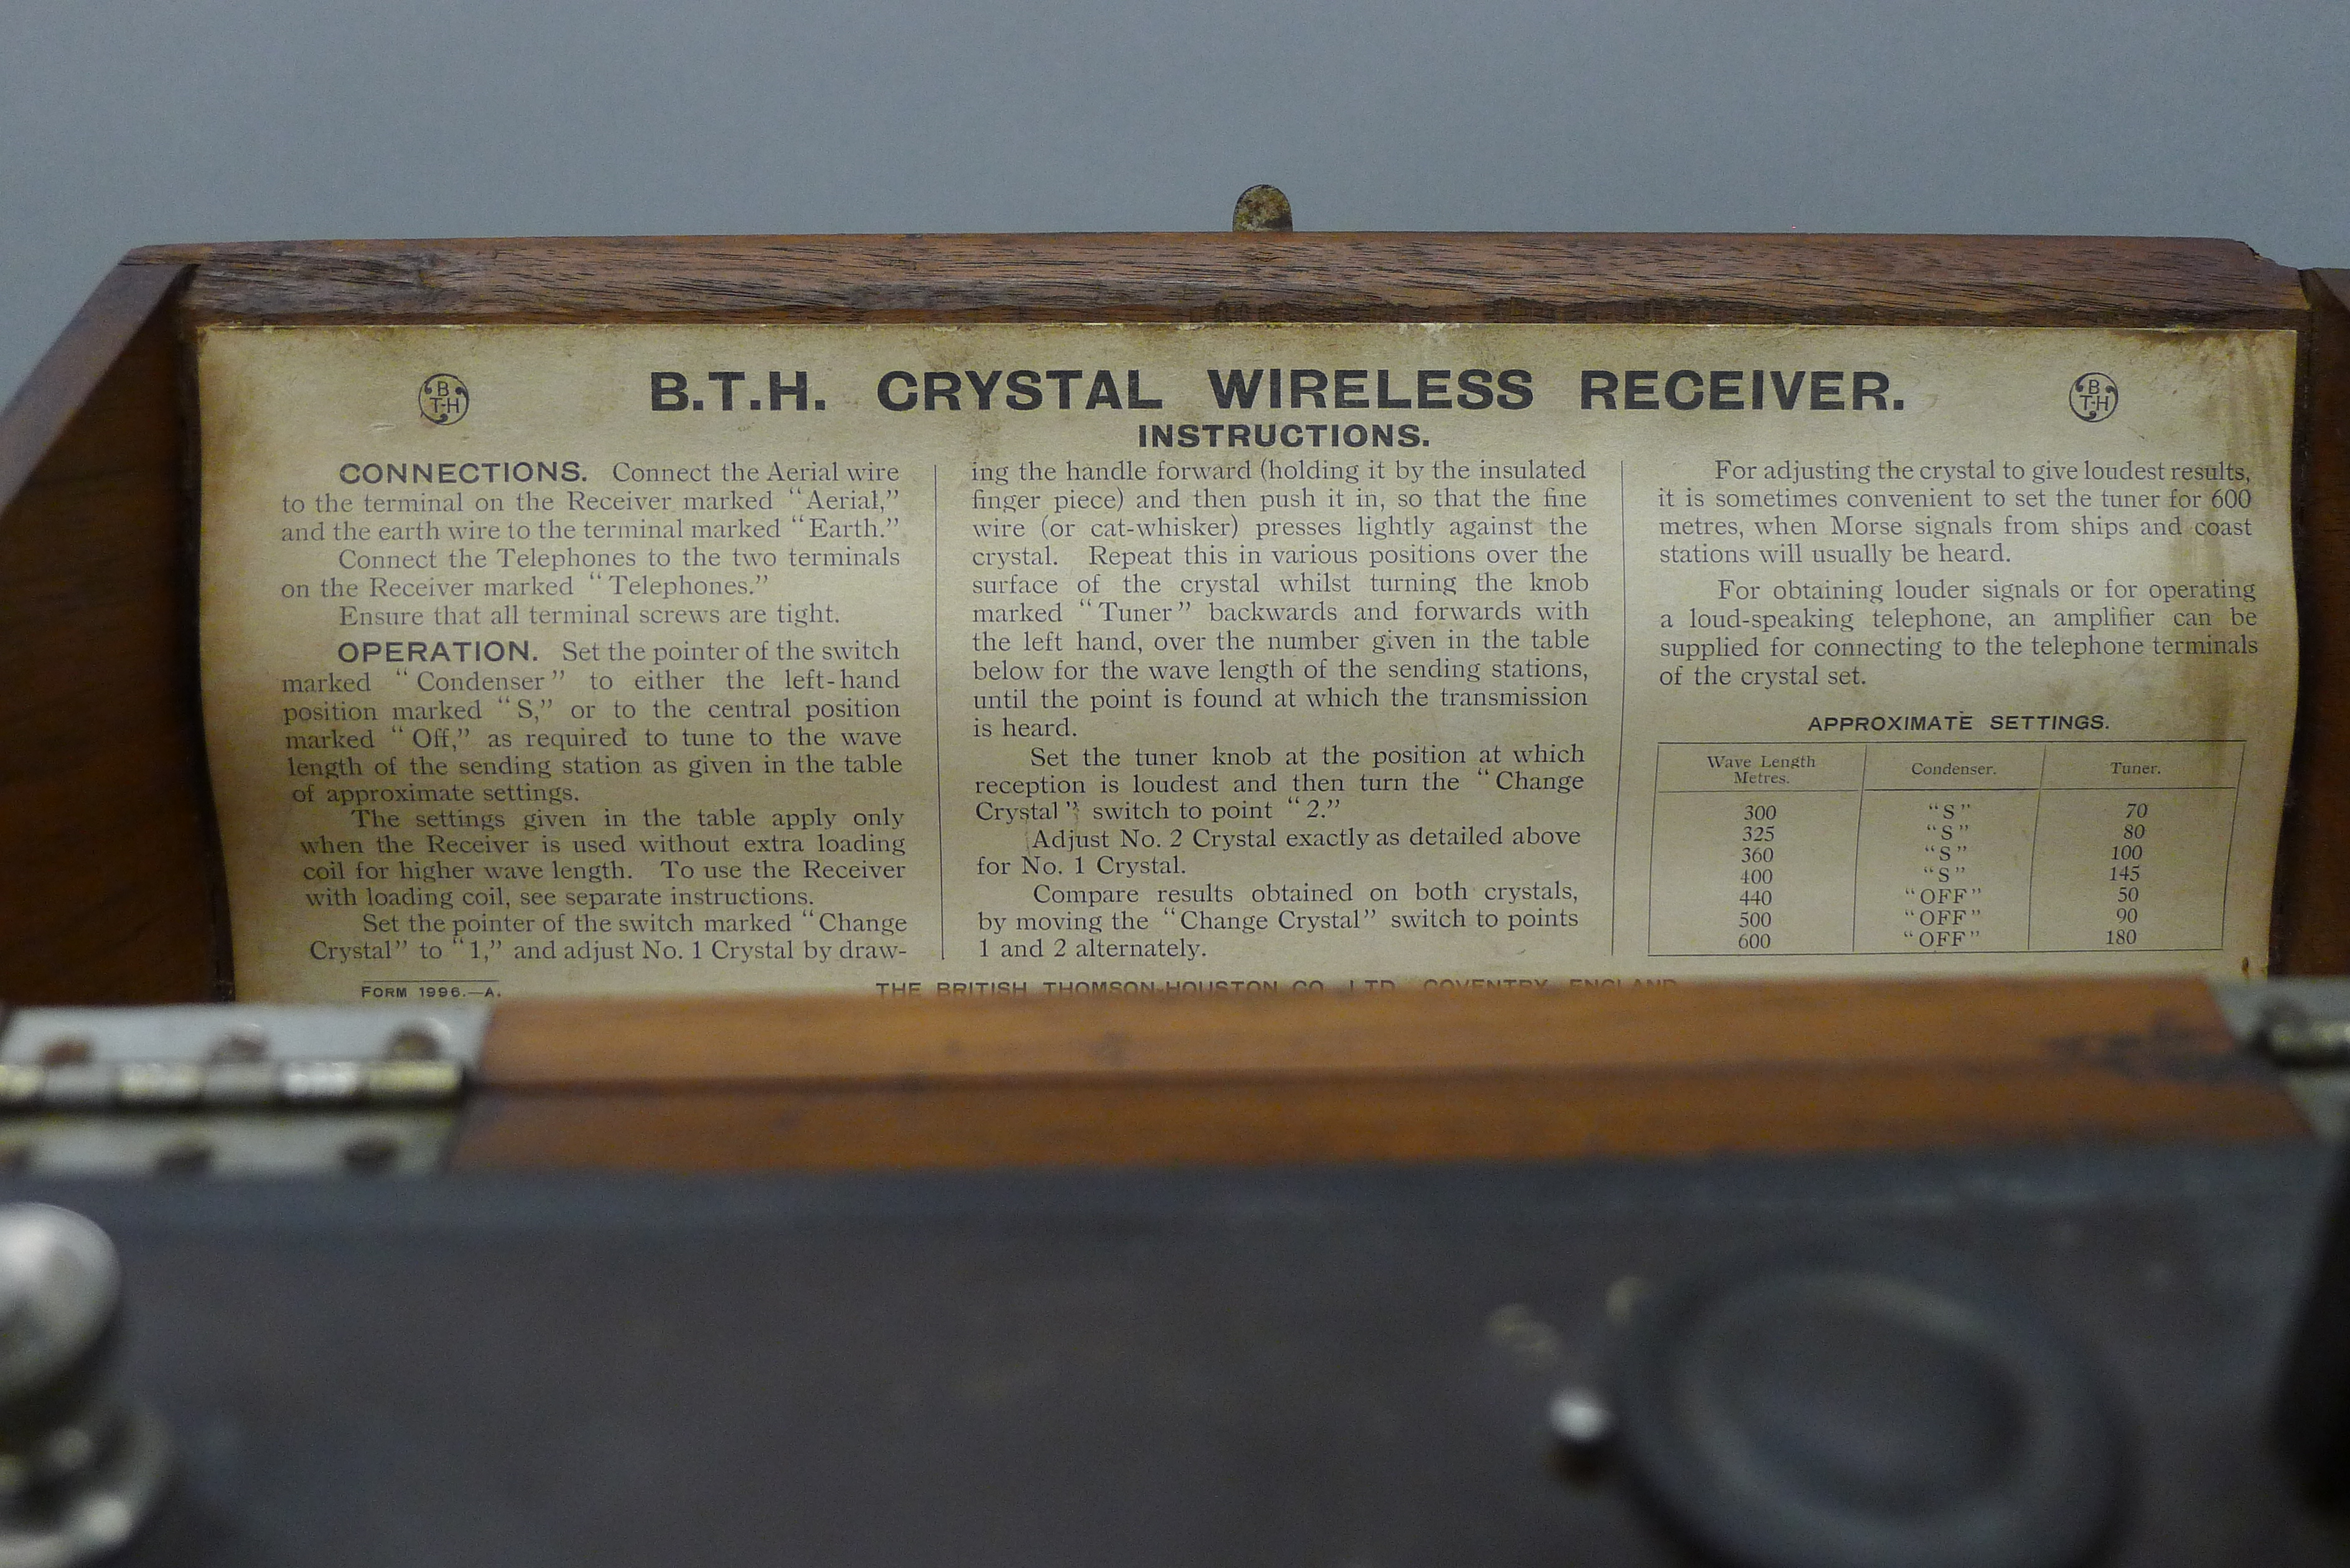 A BTH (British Thomson-Houston Co Lt) Wireless Crystal Receiver and headphones. 28.5 cm wide. - Image 6 of 9